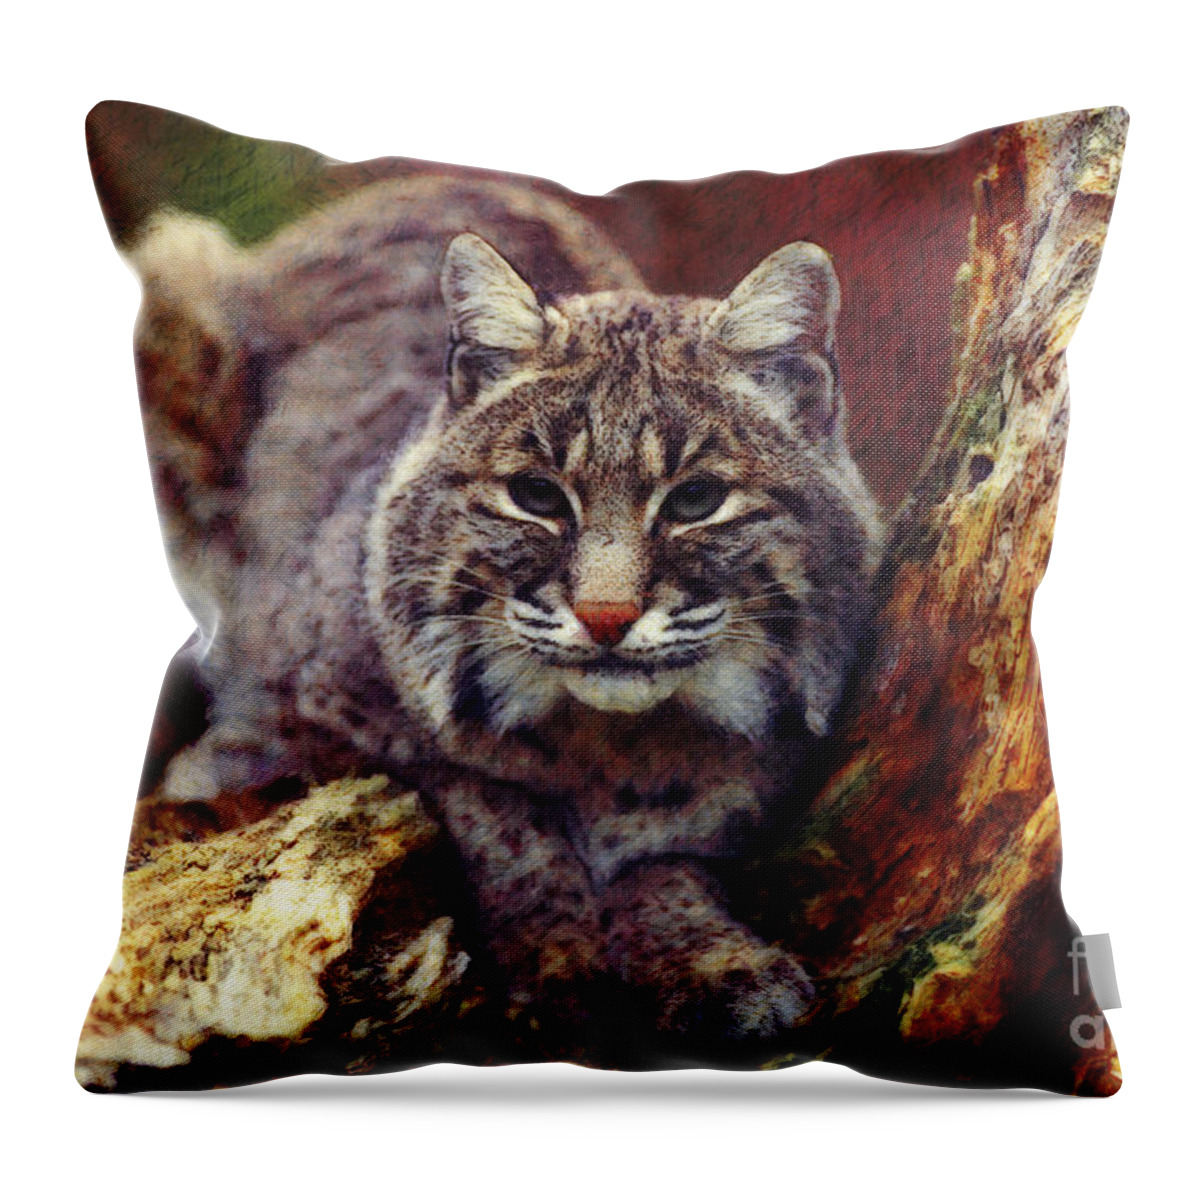  Throw Pillow featuring the digital art Here Kitty Kitty by Lianne Schneider